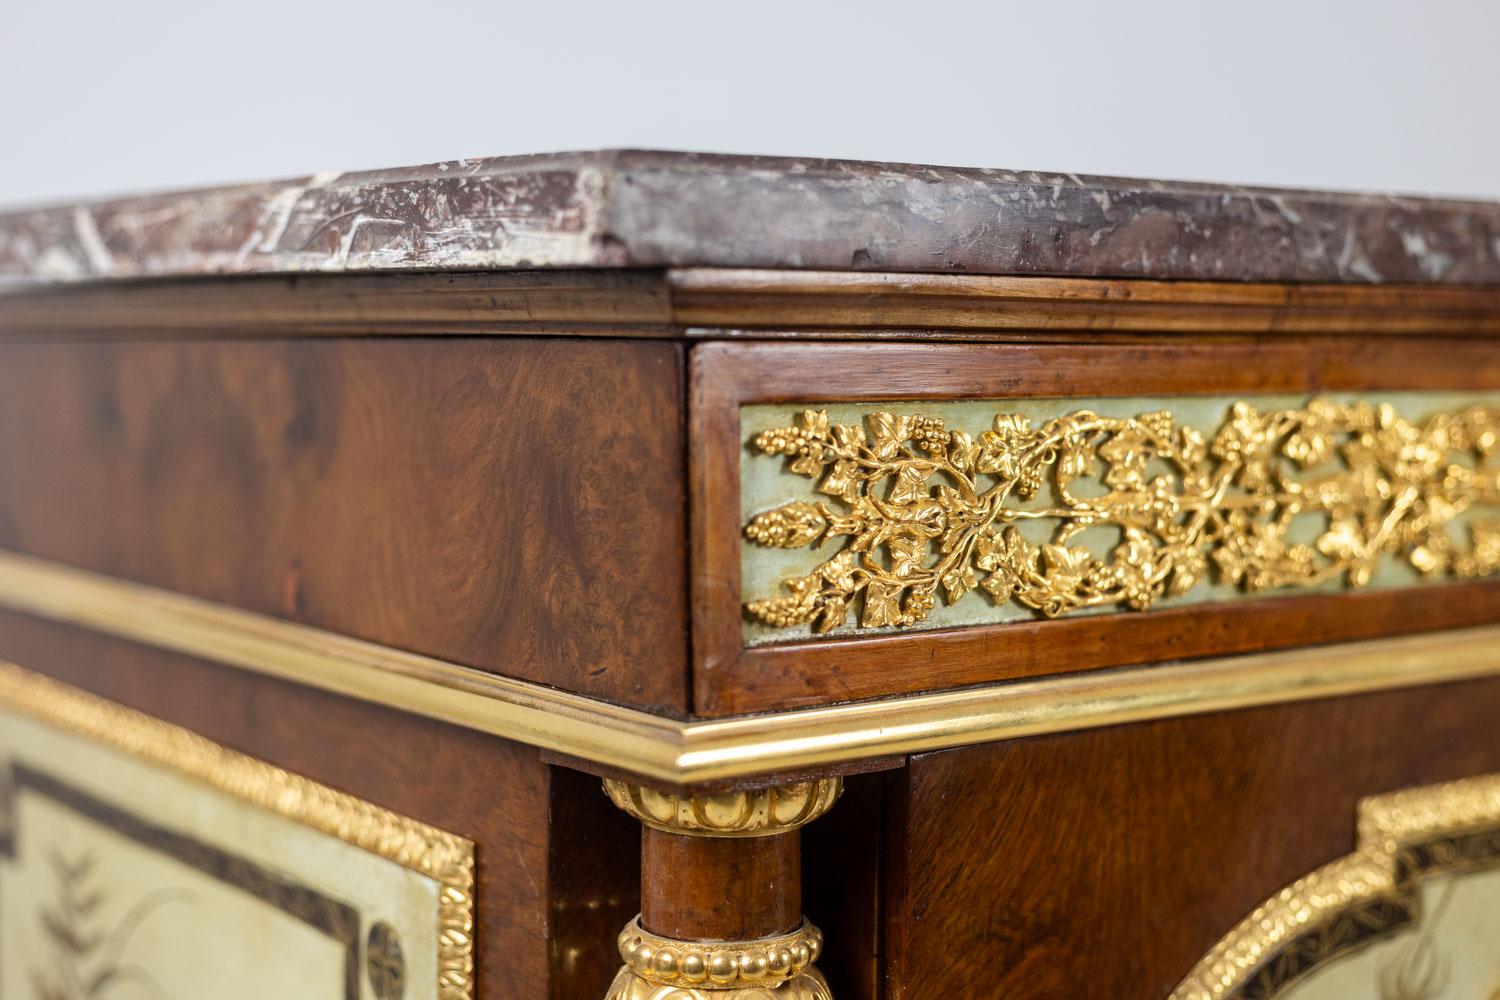 Empire style chest of drawers in lacquer, bronze and marble. Nineteenth century. 6